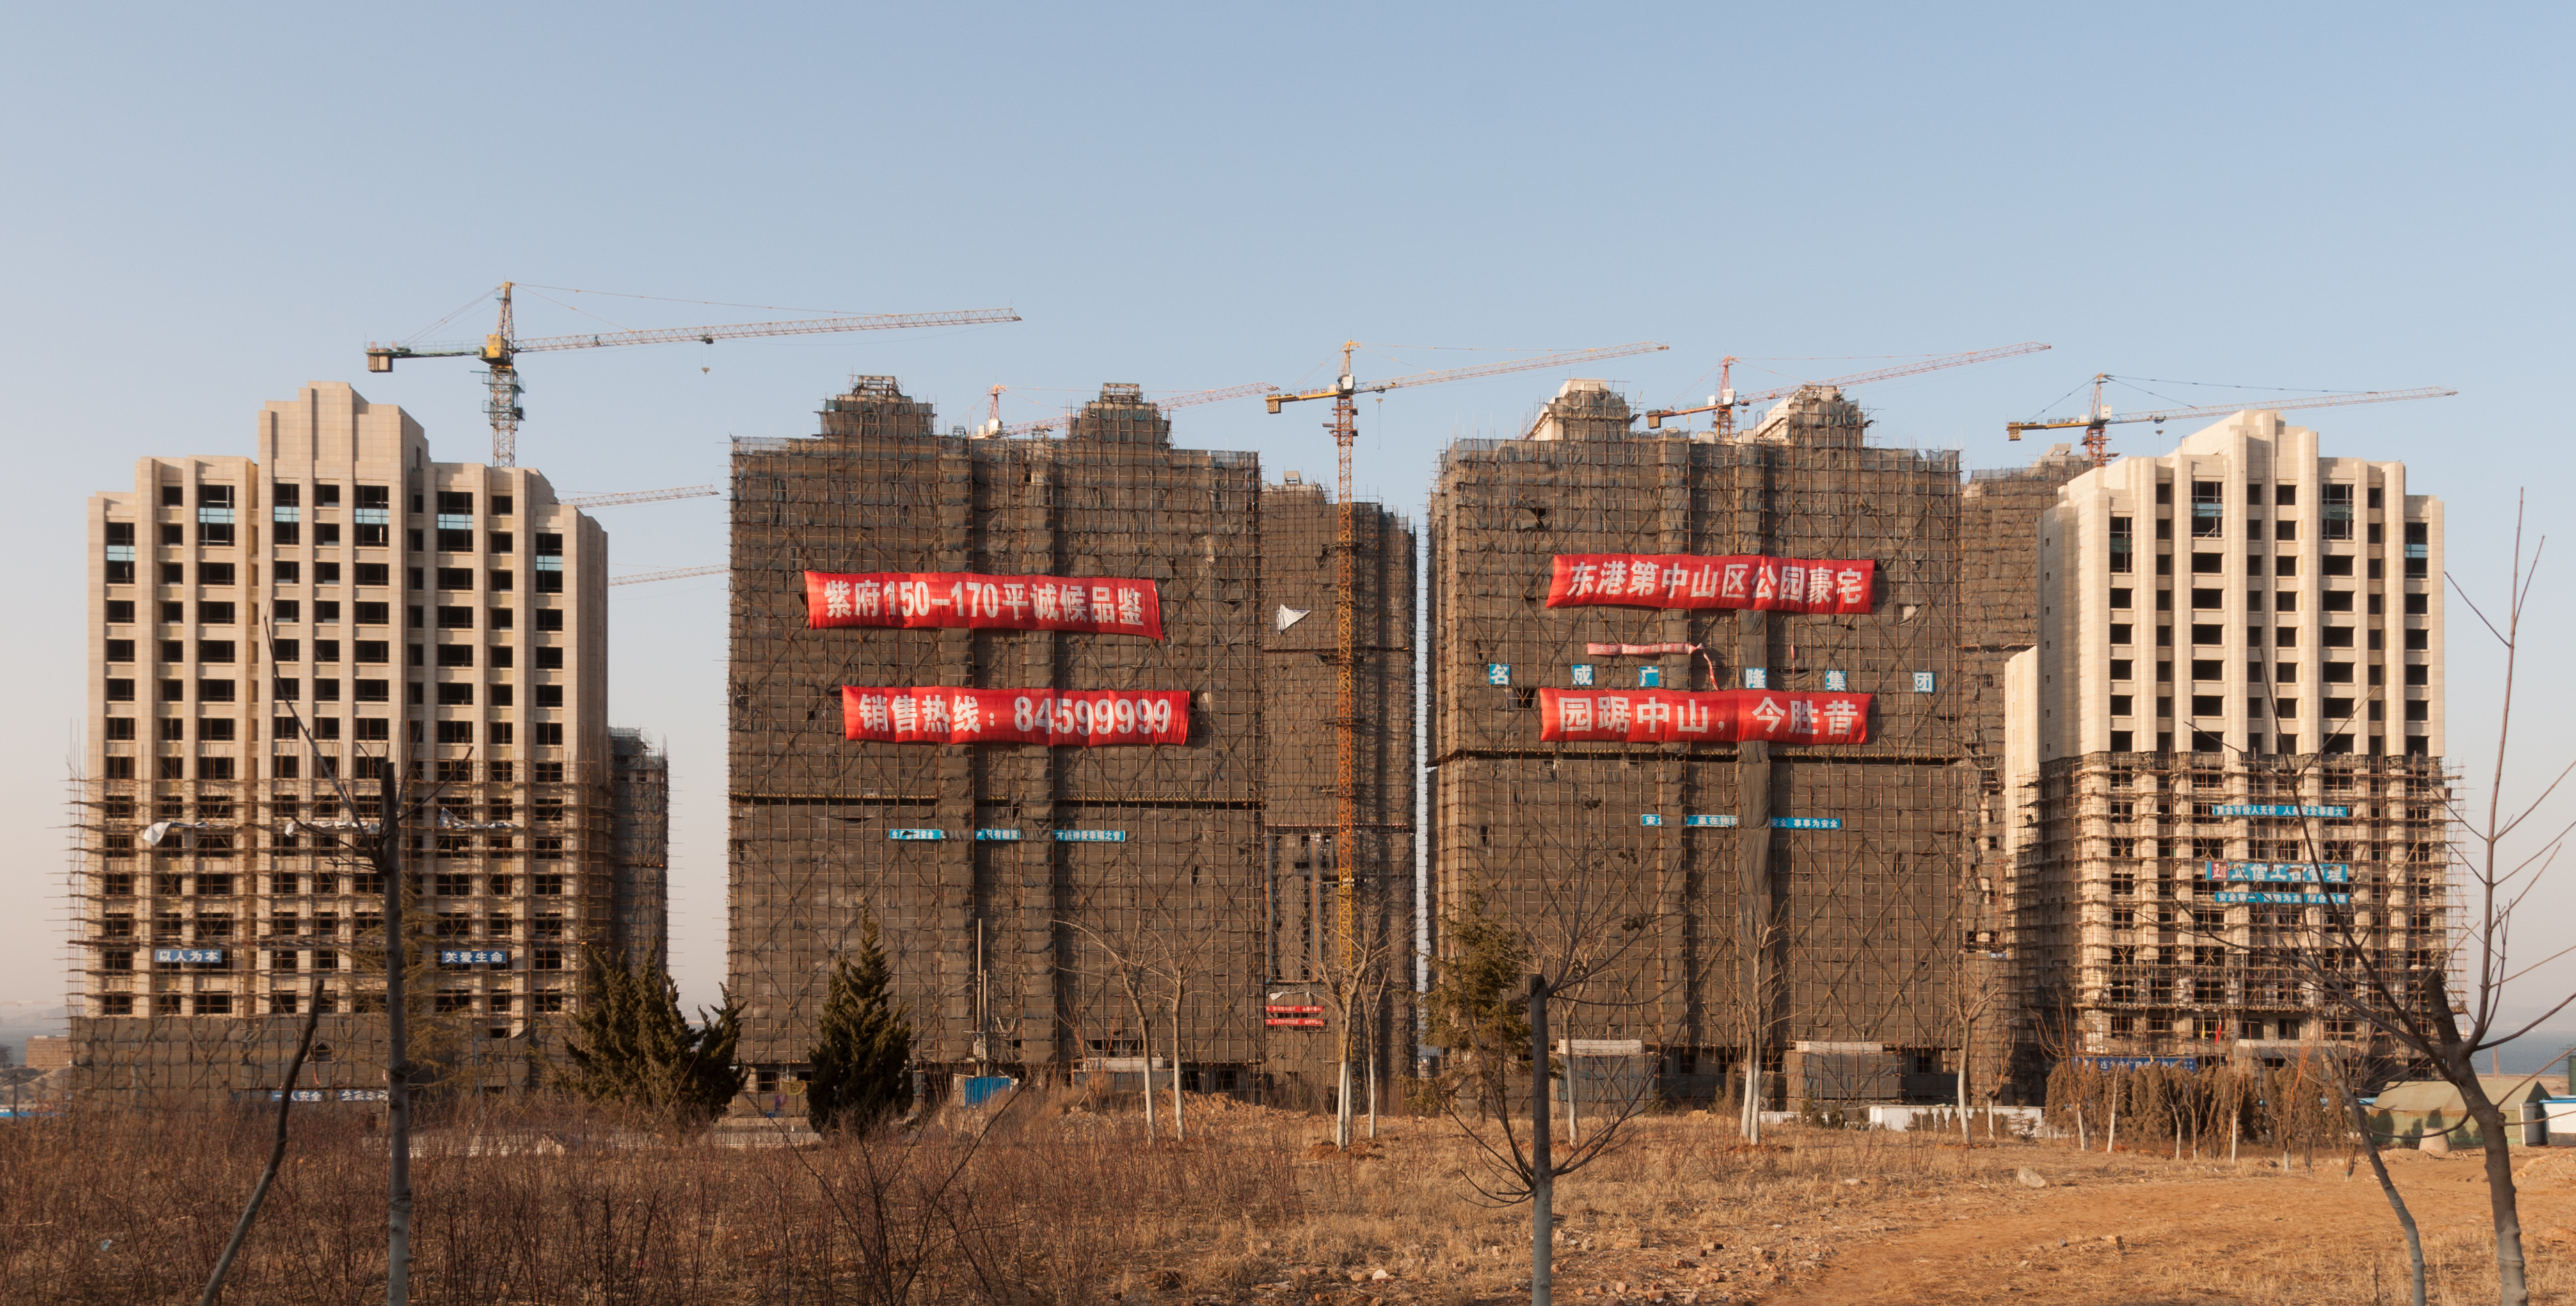 Four high-rise buildings under construction with scaffolding and cranes, featuring large red banners with text in Chinese, situated in a barren area with scattered trees and a clear sky.